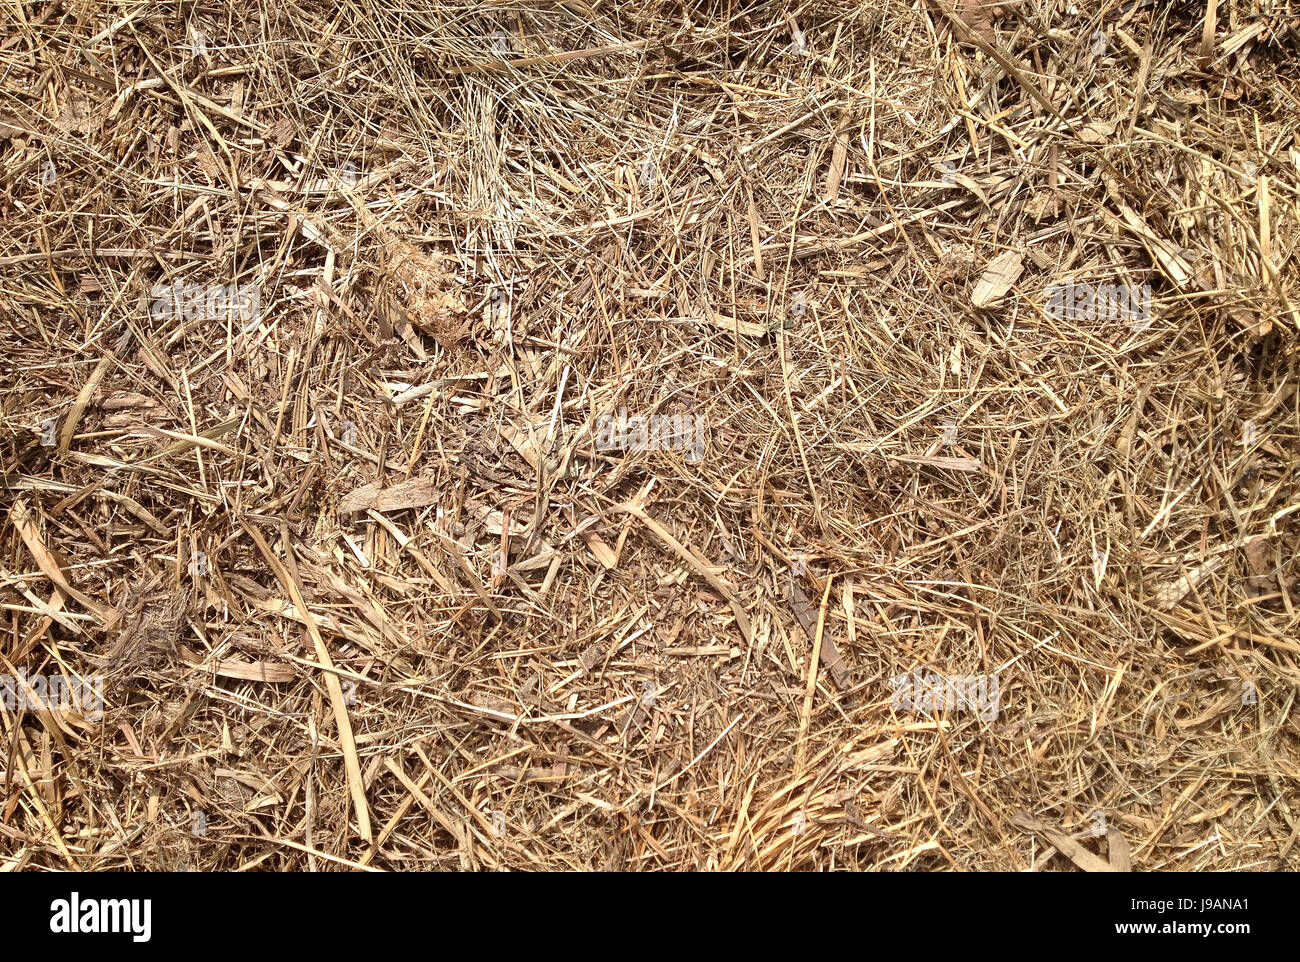 Old straw or hay lying on ground. Dried grass texture. Vintage Stock Photo